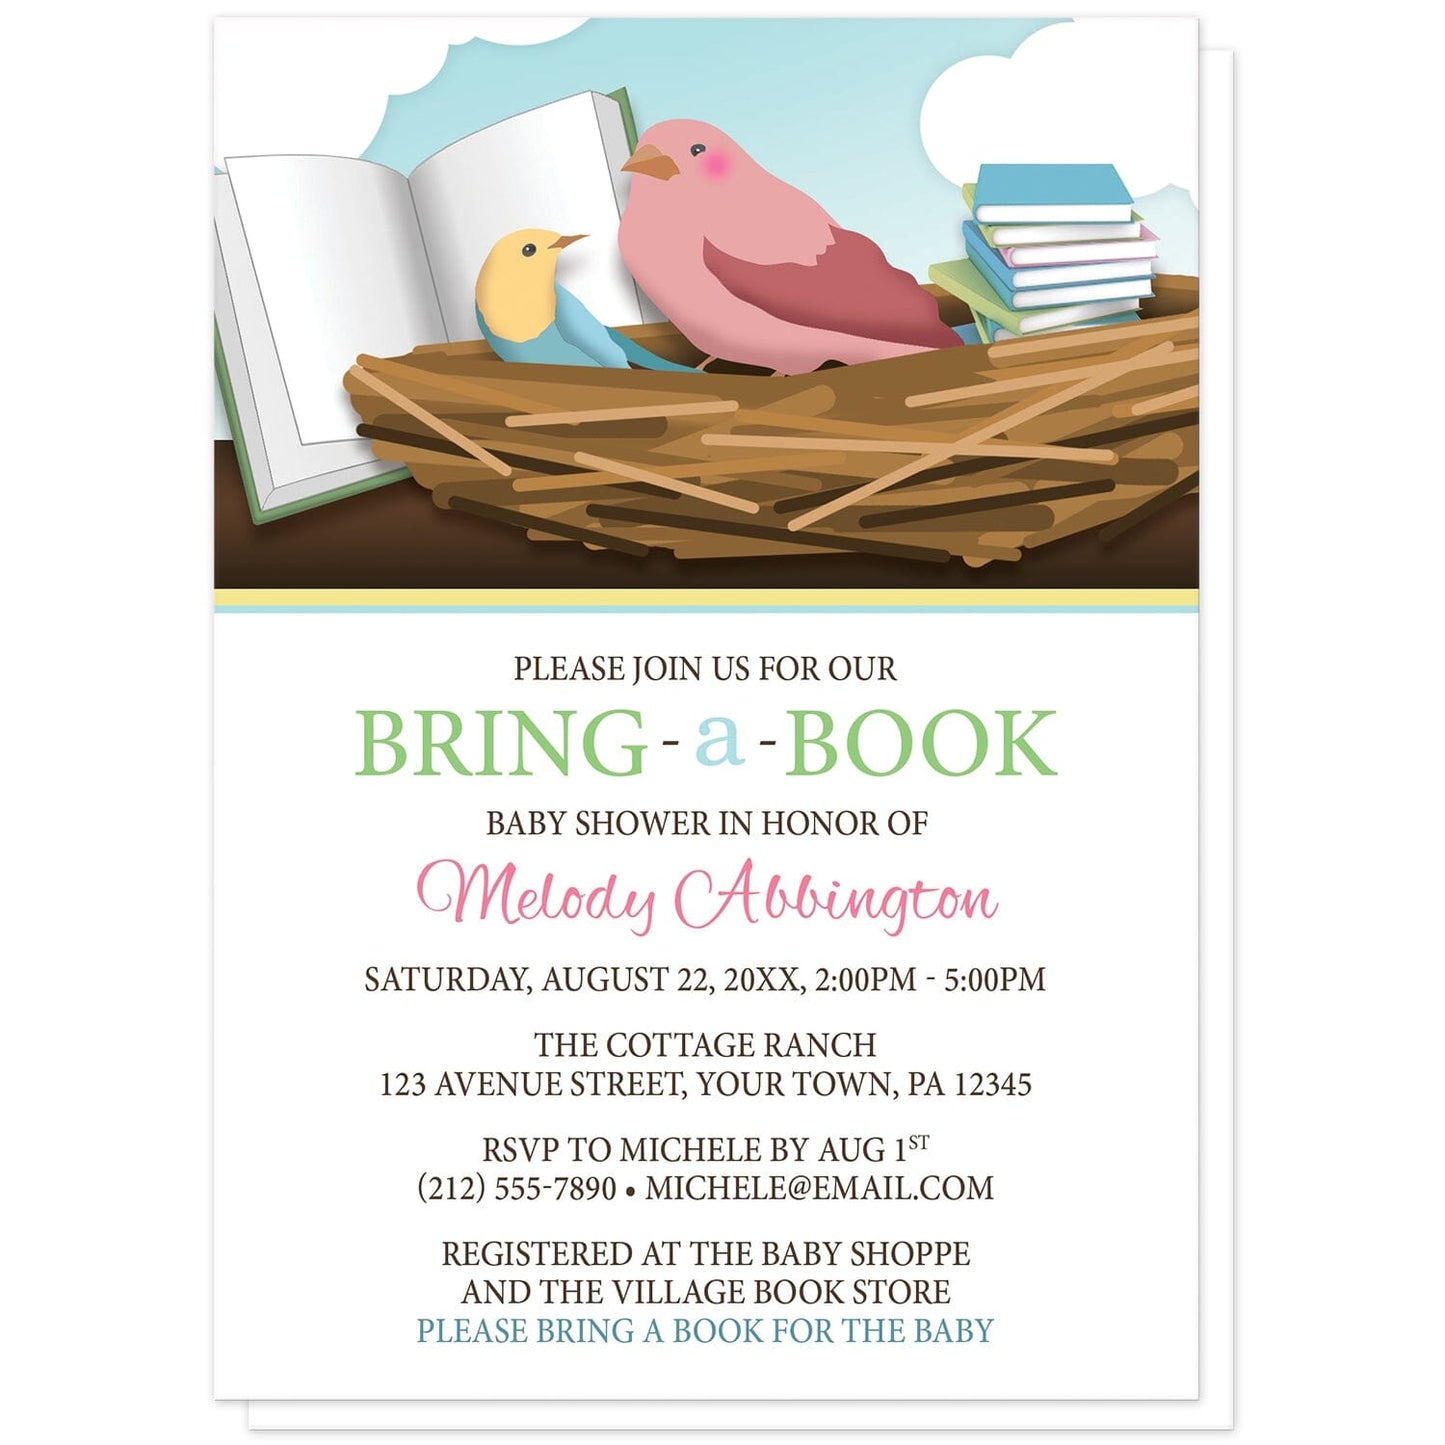 Bird Nest Bring a Book Baby Shower Invitations at Artistically Invited. Cute bird nest bring a book baby shower invitations with an illustration of a mommy bird and baby bird in a nest, reading a large open book together. A tall stack of books sits in the nest beside them. Your personalized baby shower celebration details are custom printed in green, blue, pink, and brown over white. 